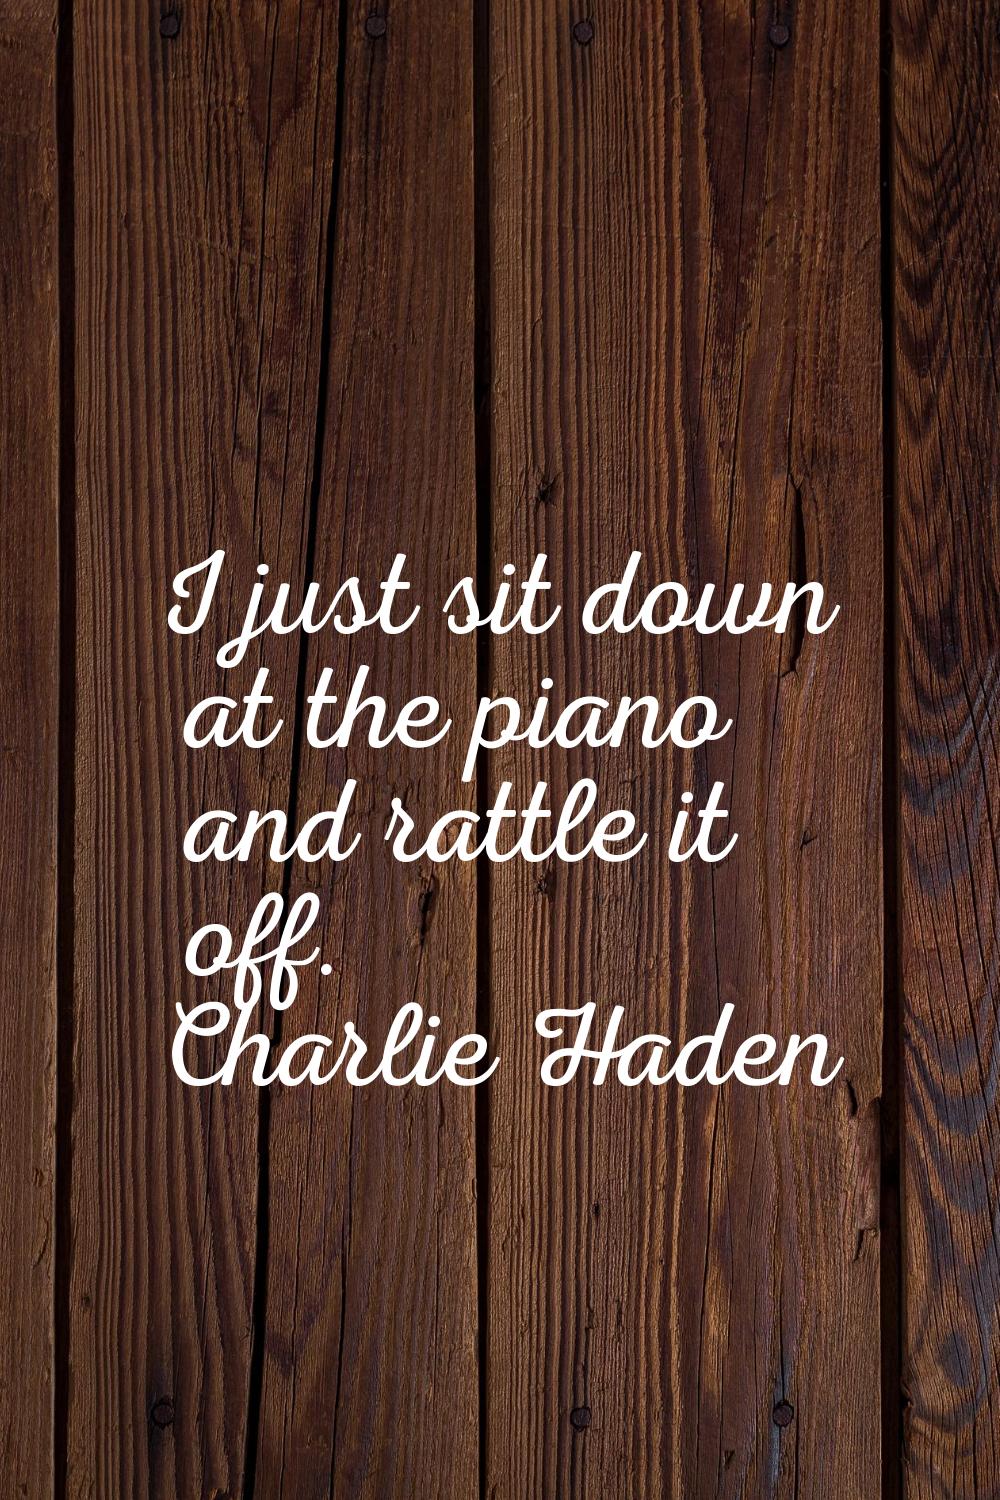 I just sit down at the piano and rattle it off.